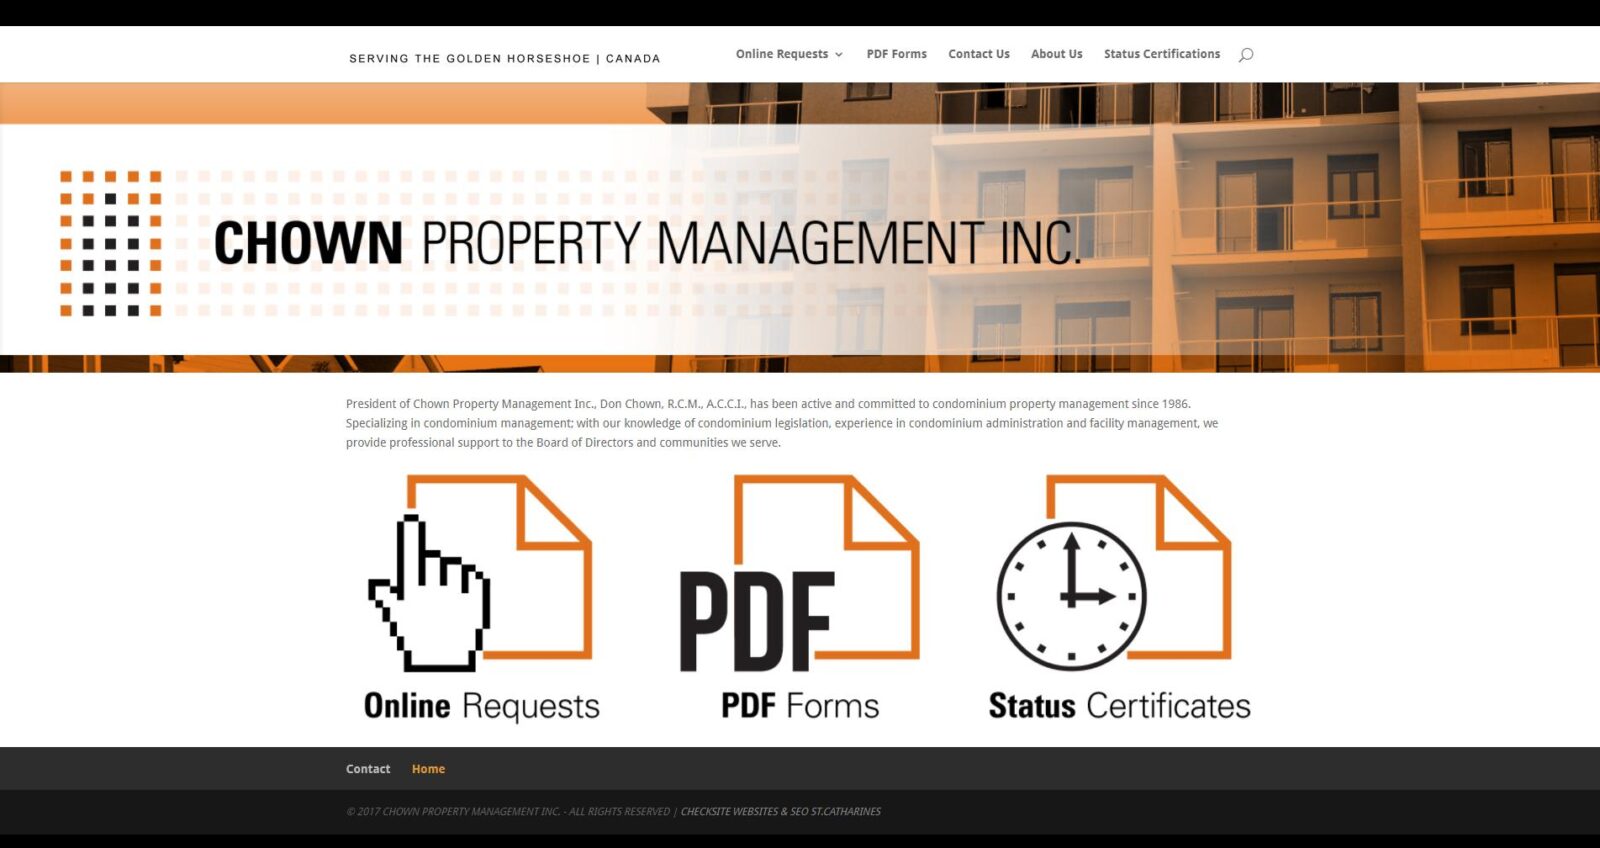 Chown Property Management Inc.